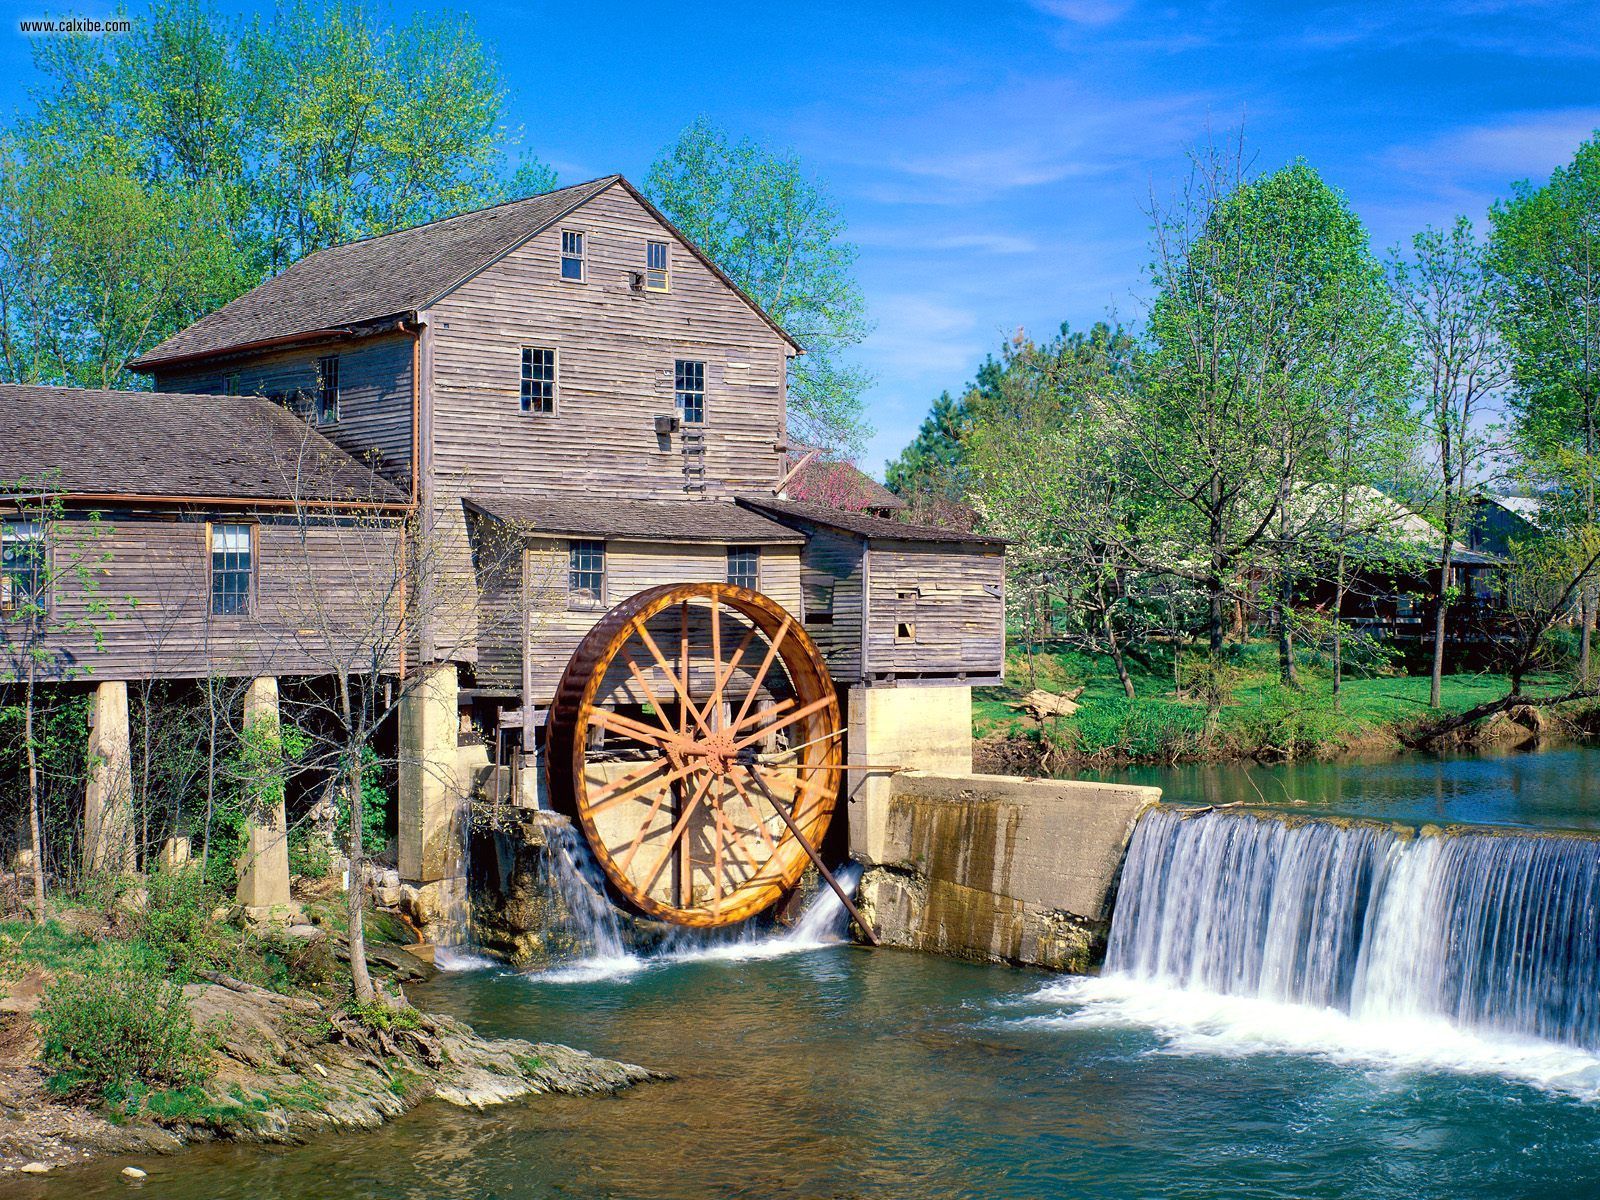 Places Old Mill Pigeon Forge Tennessee Desktop Wallpaper Nr